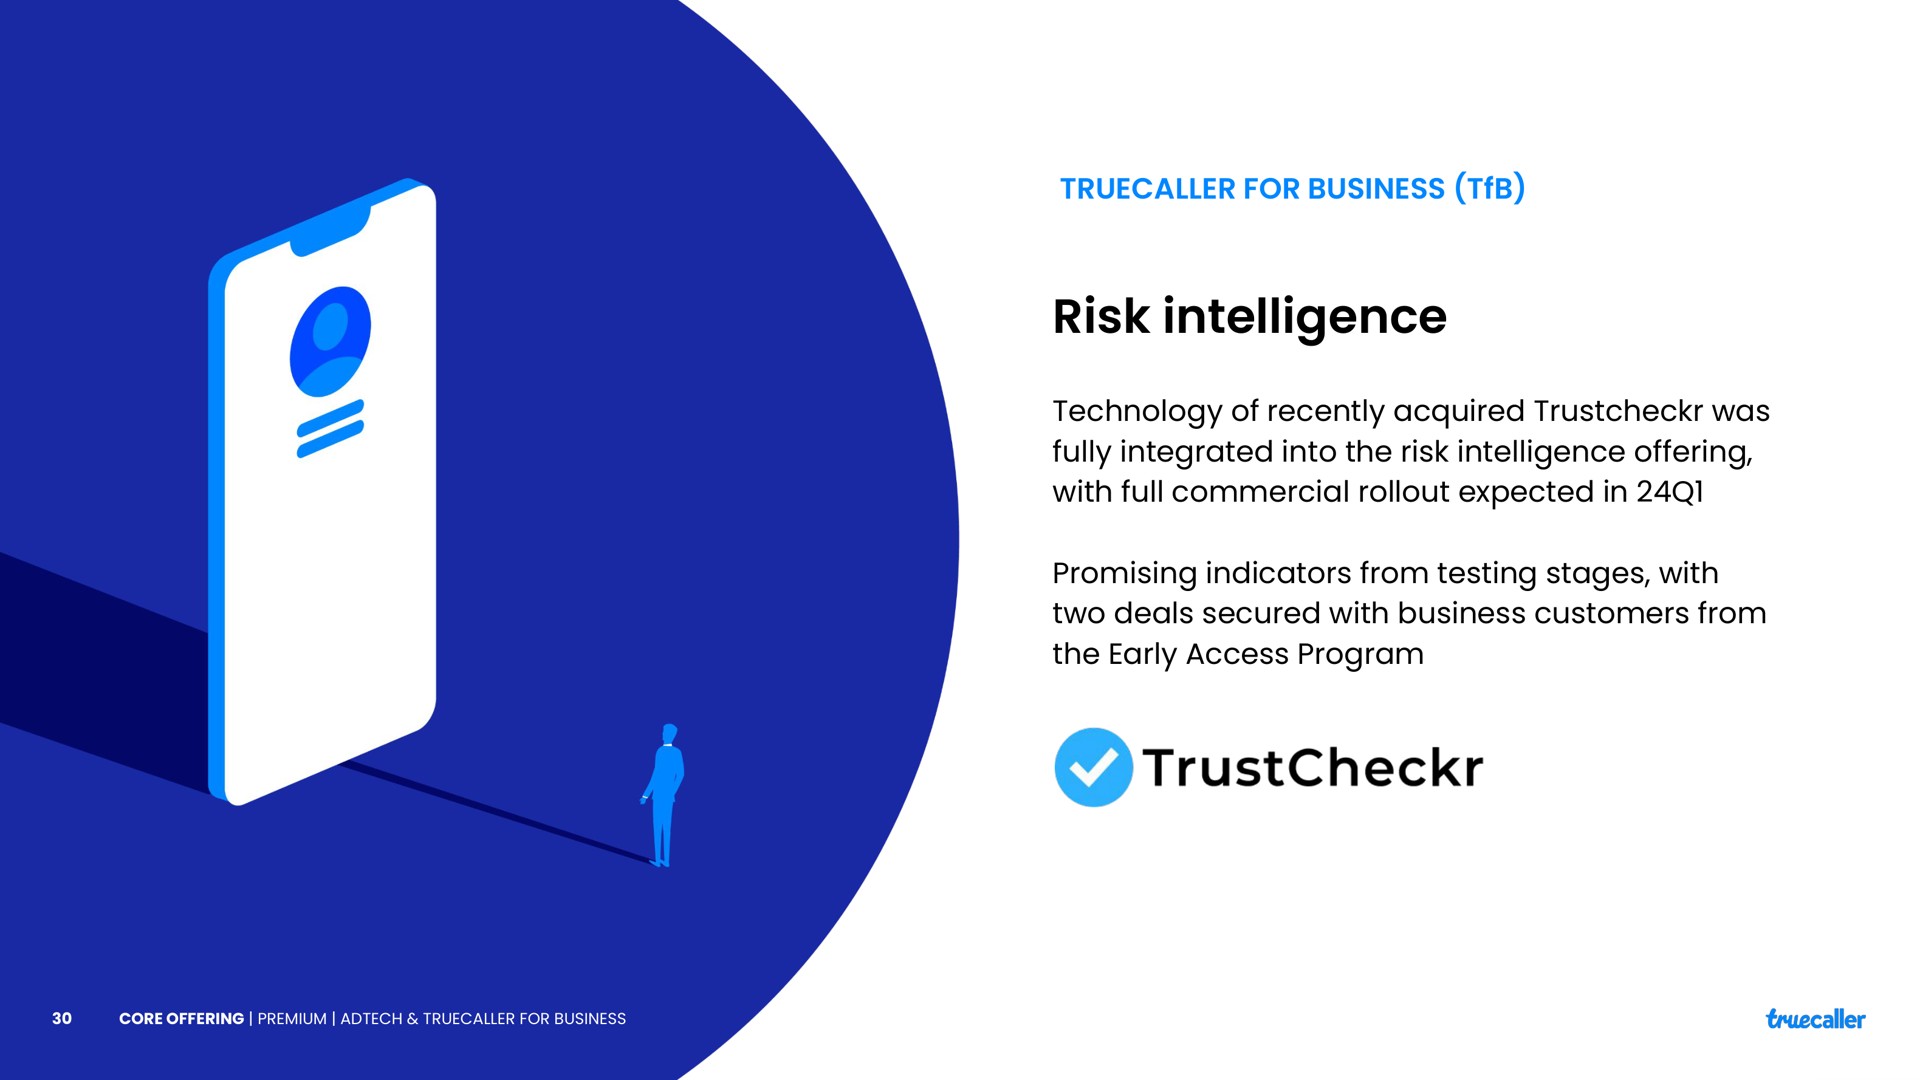 for business risk intelligence technology of recently acquired was fully integrated into the risk intelligence offering with full commercial expected in promising indicators from testing stages with two deals secured with business customers from the early access program | Truecaller